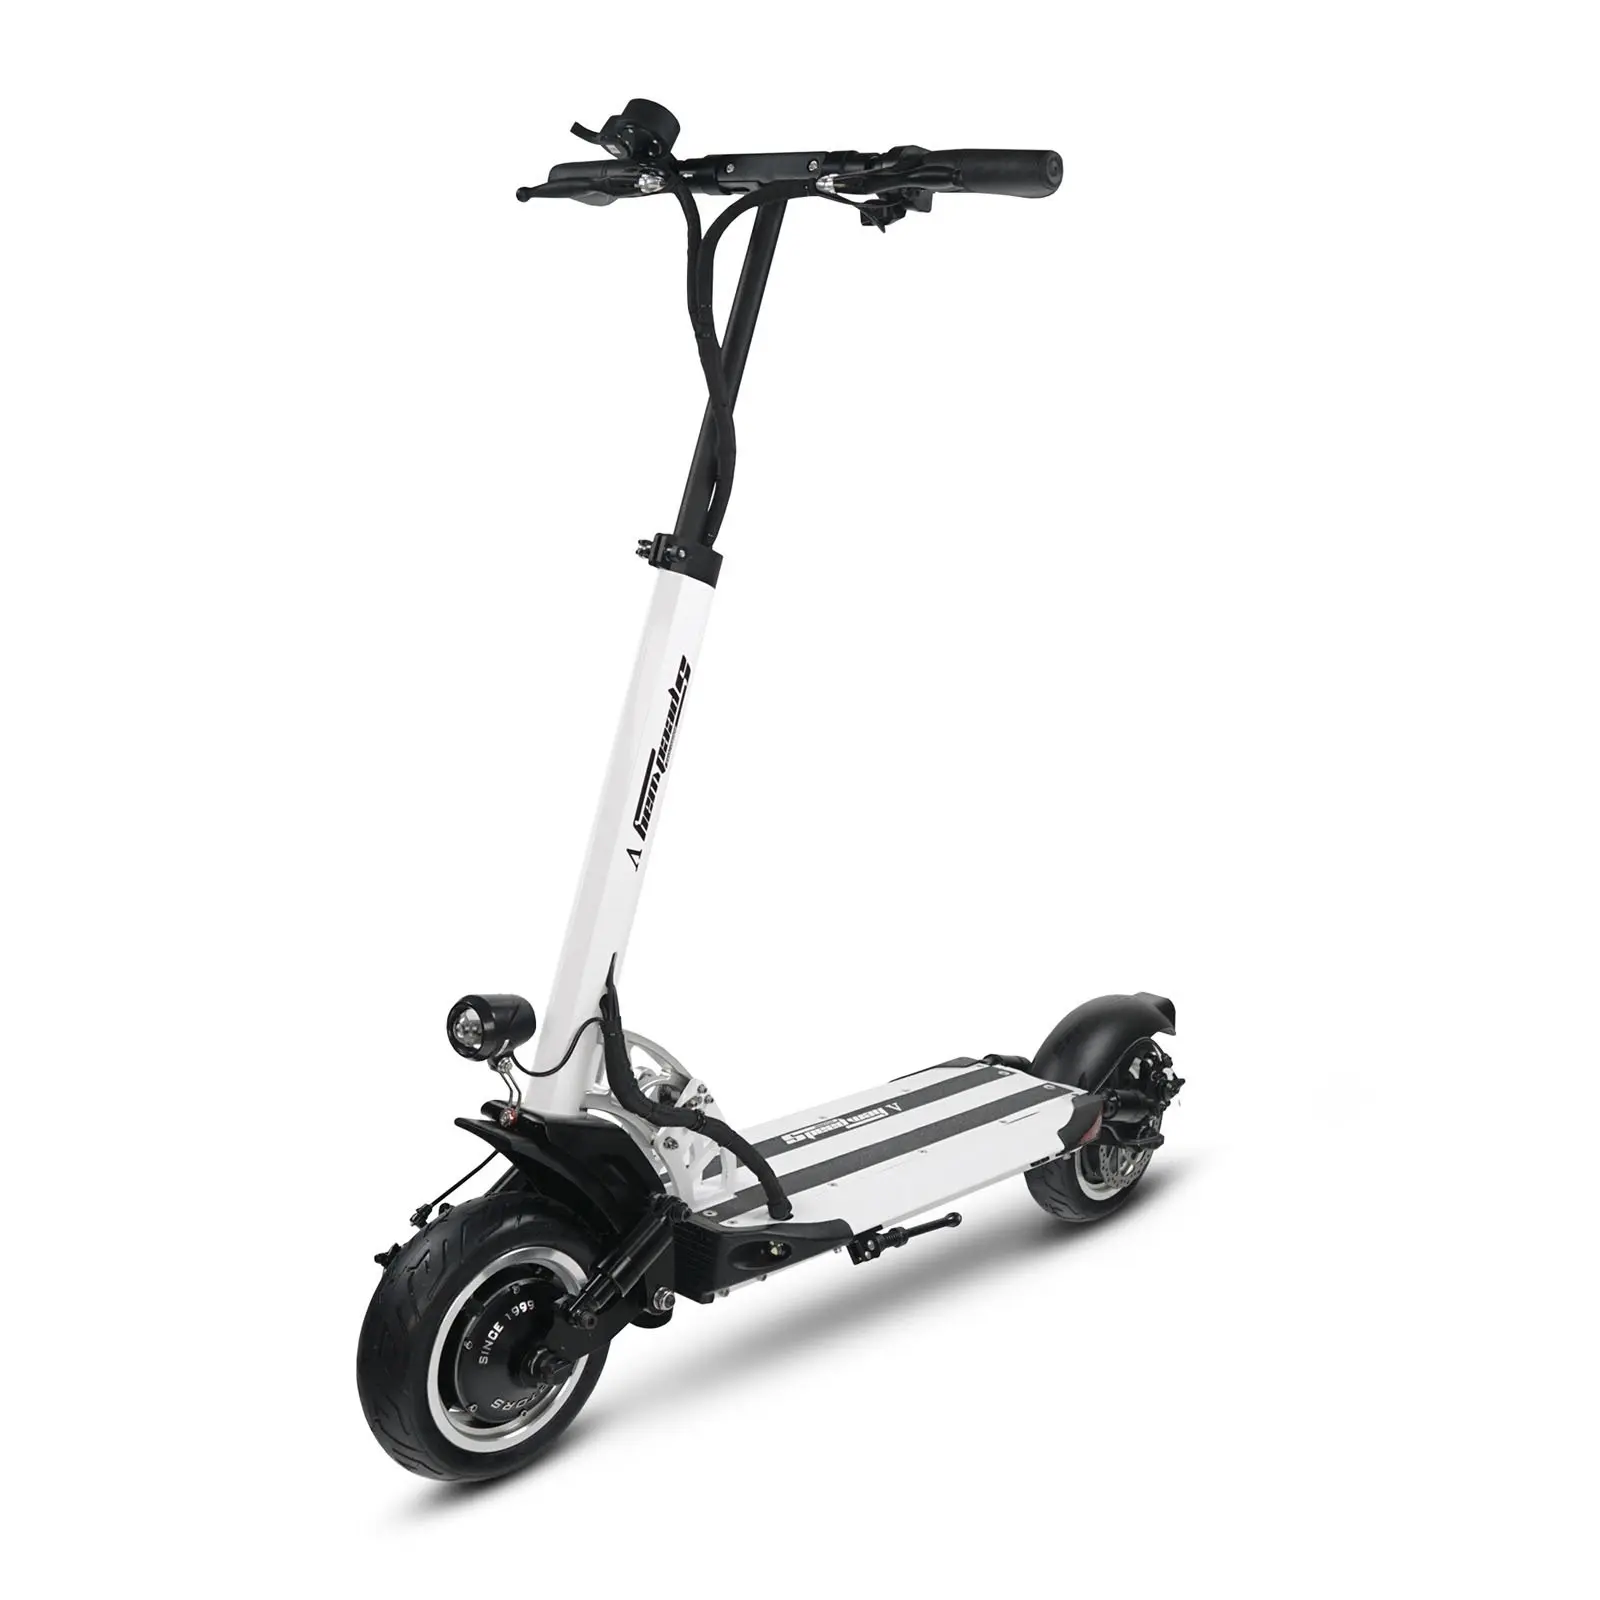 Speedway 5 Dual Motor e-Scooter Best Dual Motor Electric Scooter